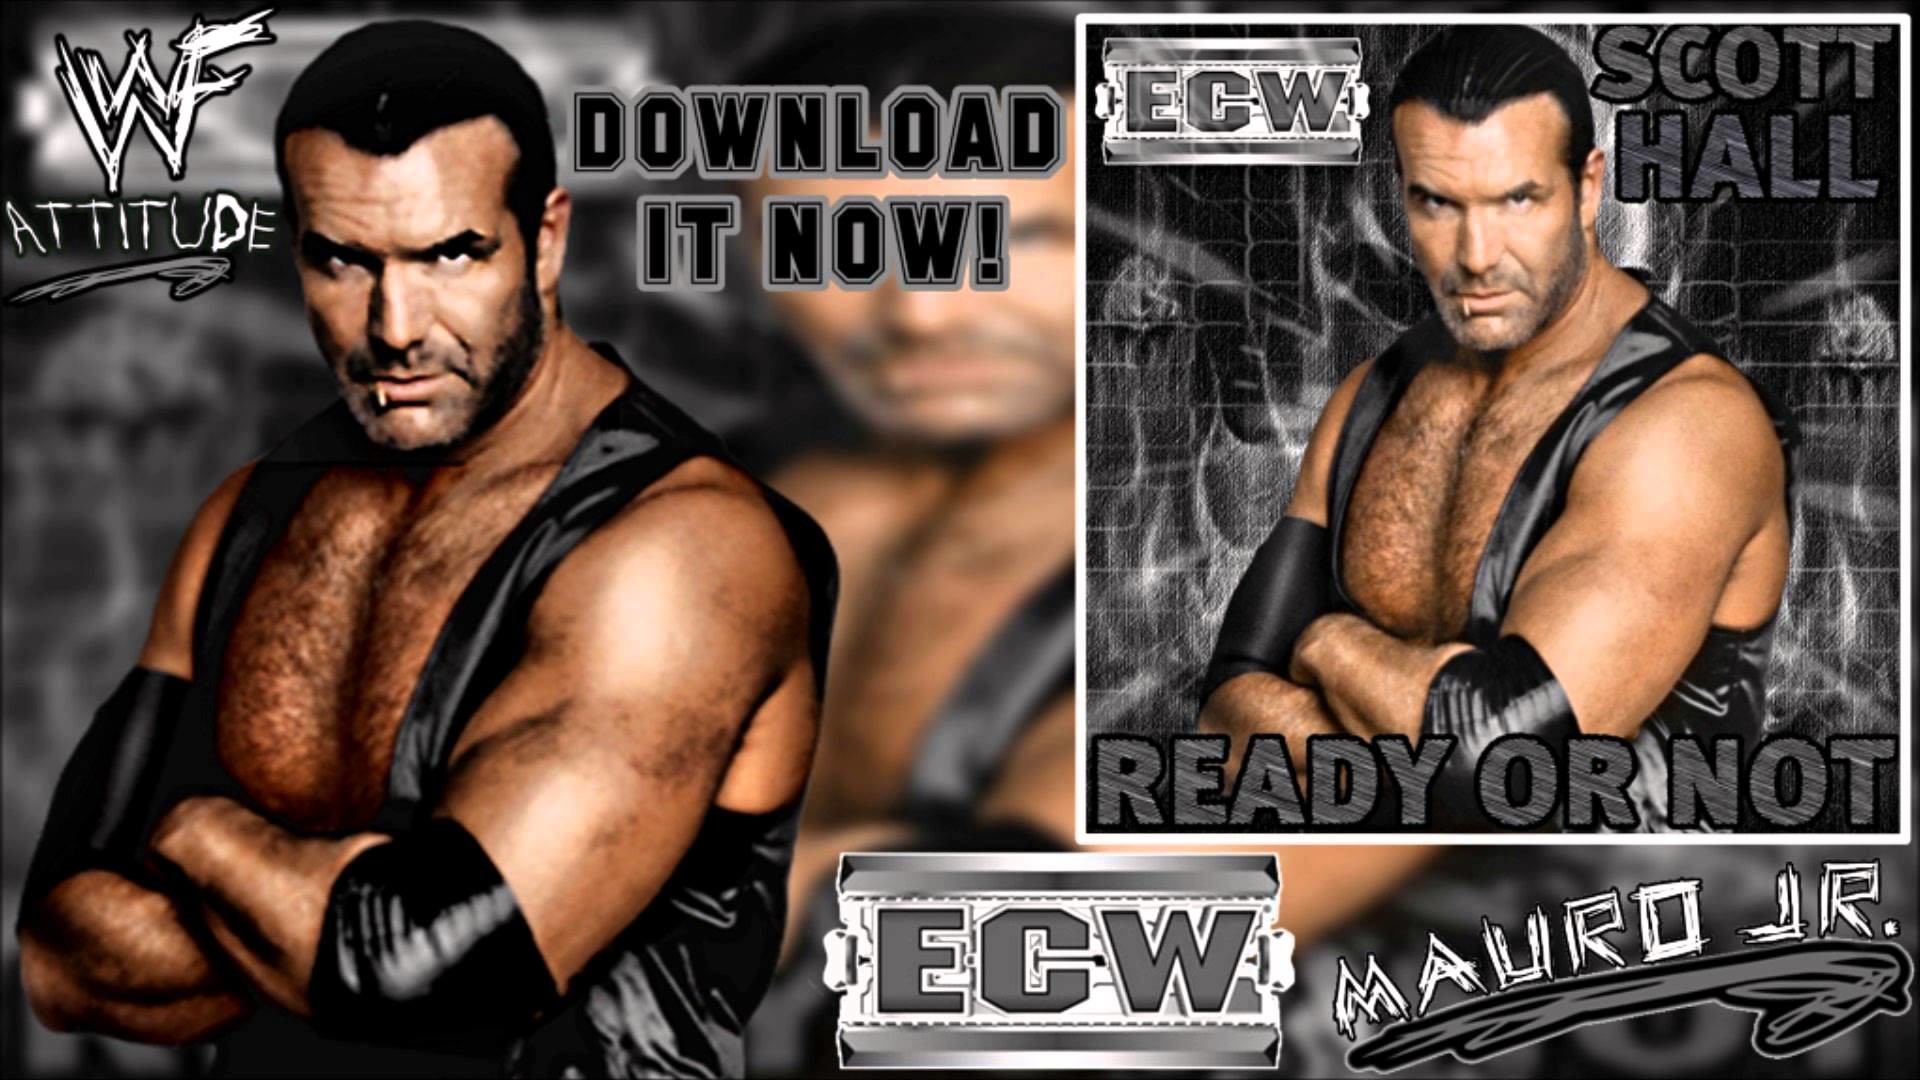 1920x1080 ECW: Ready Or Not (Scott Hall) [Feat Fugees] - Single + Download Link